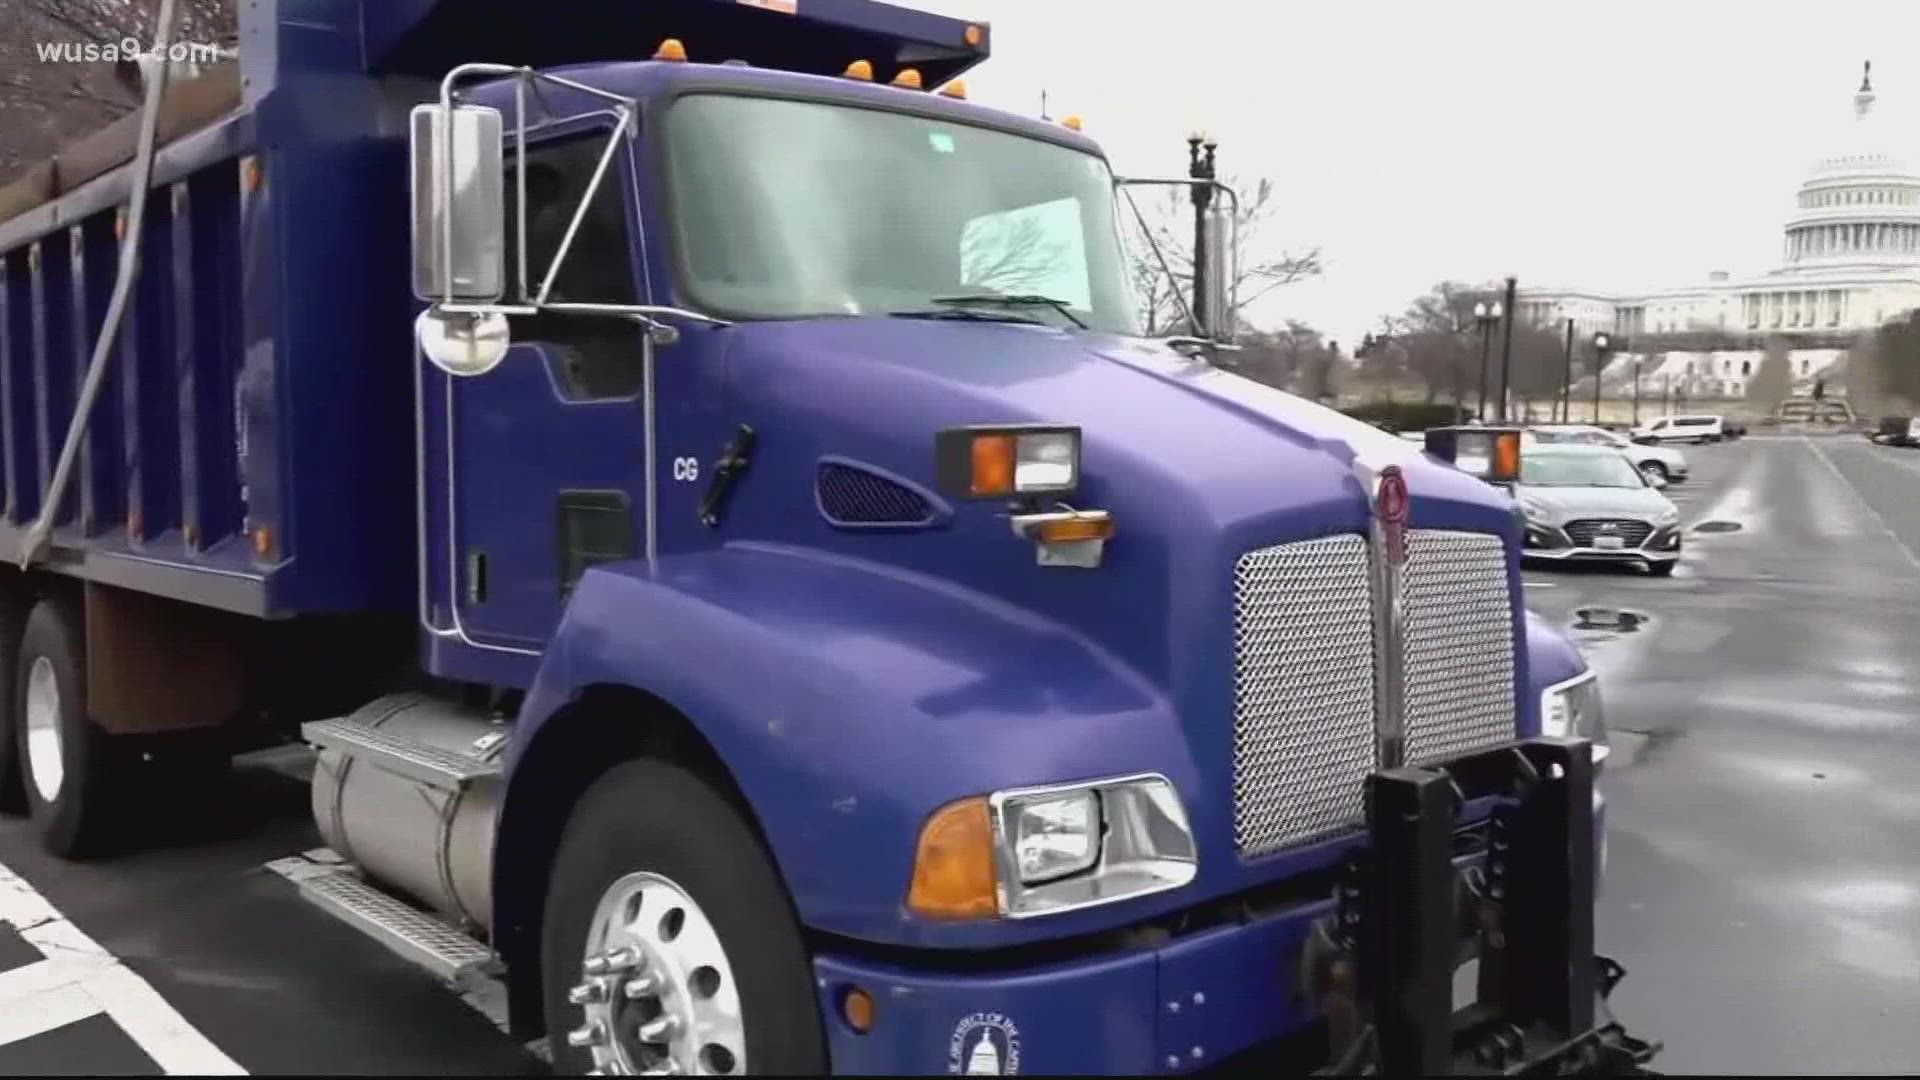 A Pennsylvania man hoping to lead thousands of truckers towards the Capitol finds few takers, but several others say they're still on the way.